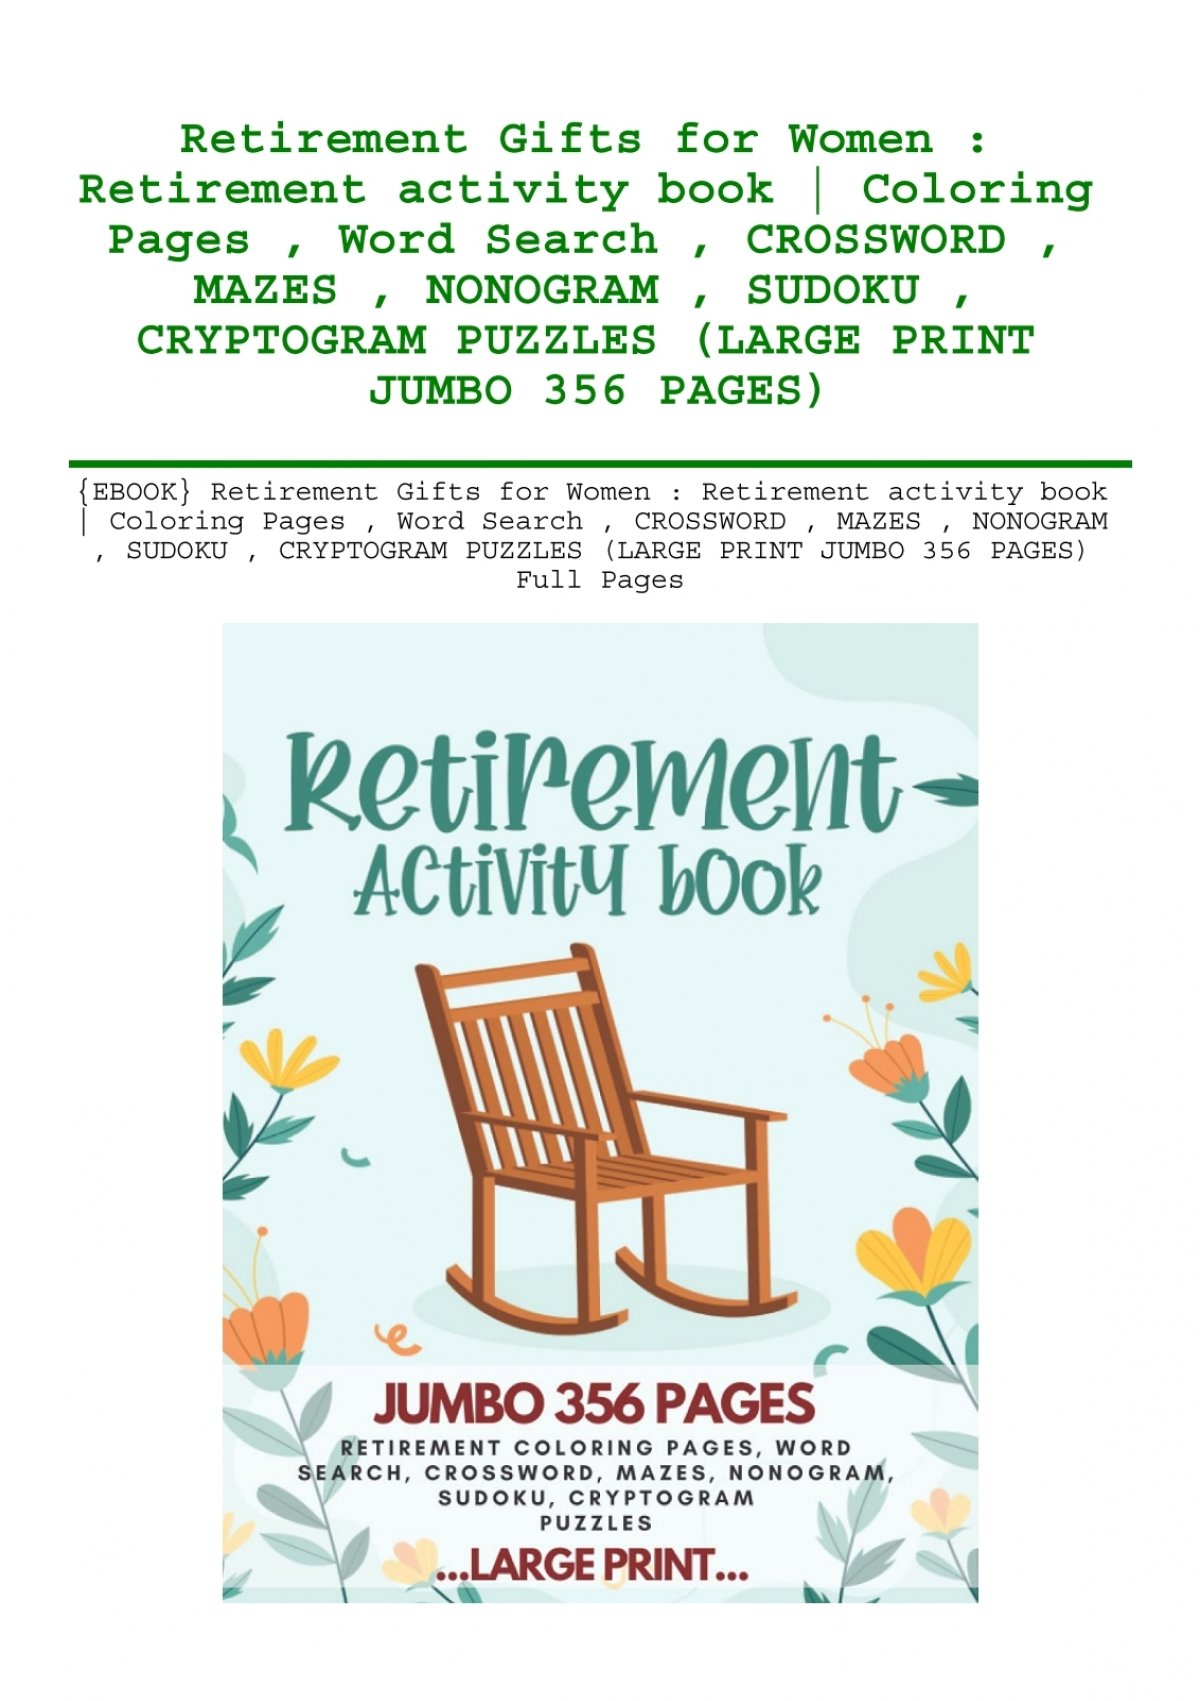 {EBOOK} Retirement Gifts for Women Retirement activity book Coloring